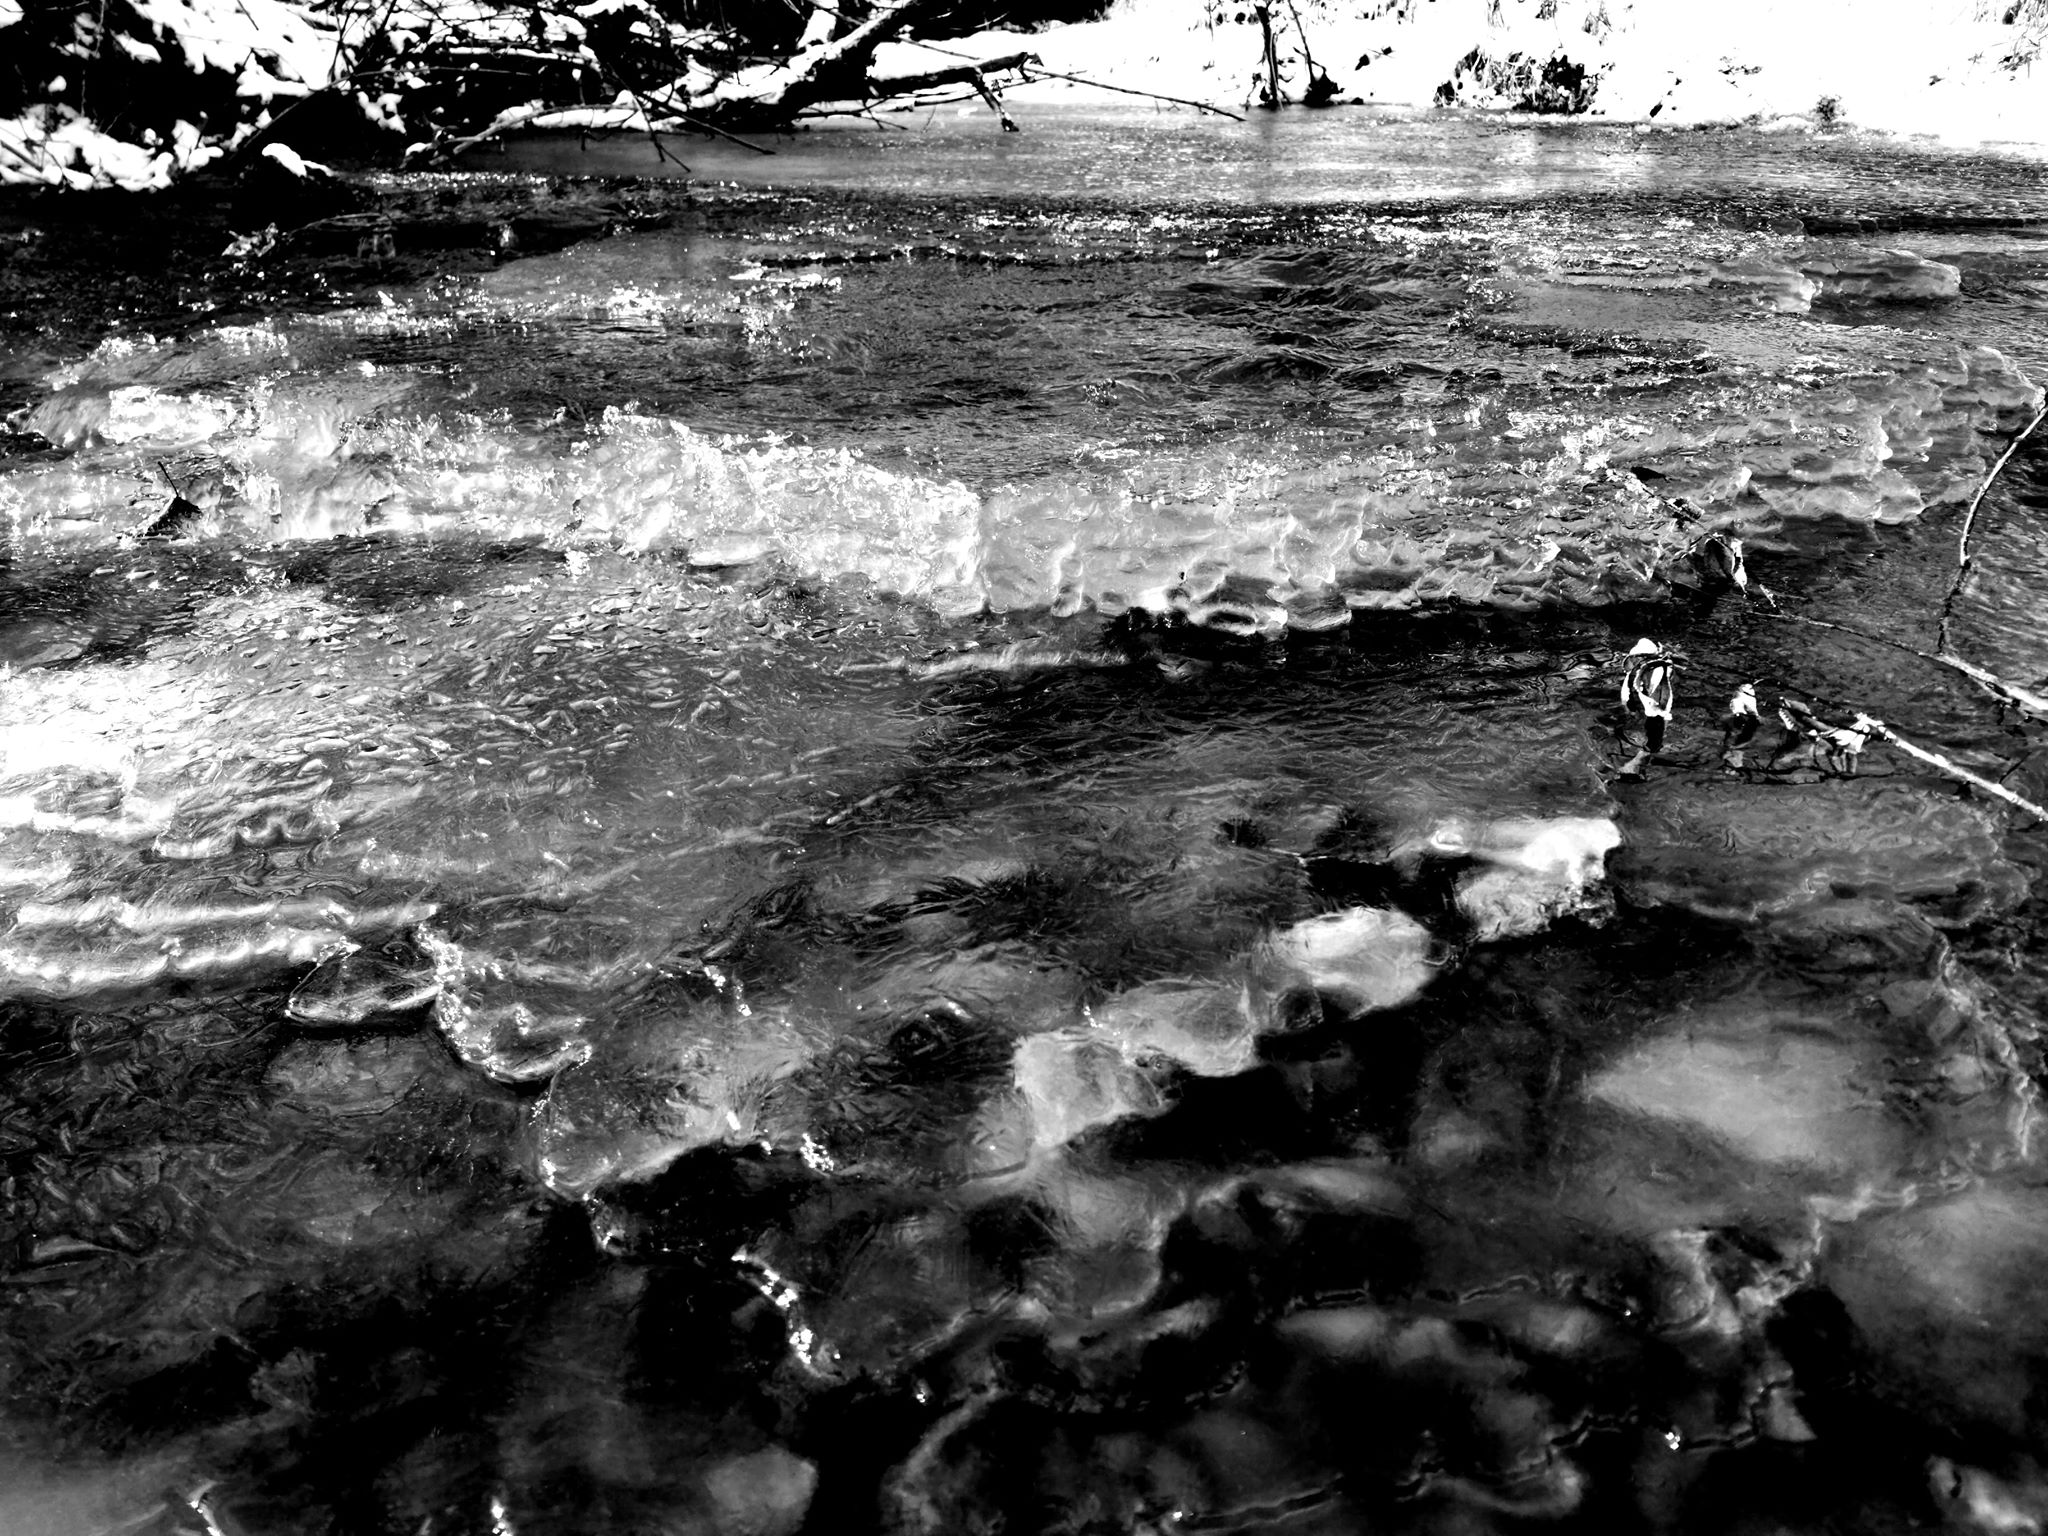 Ice on river in black and white